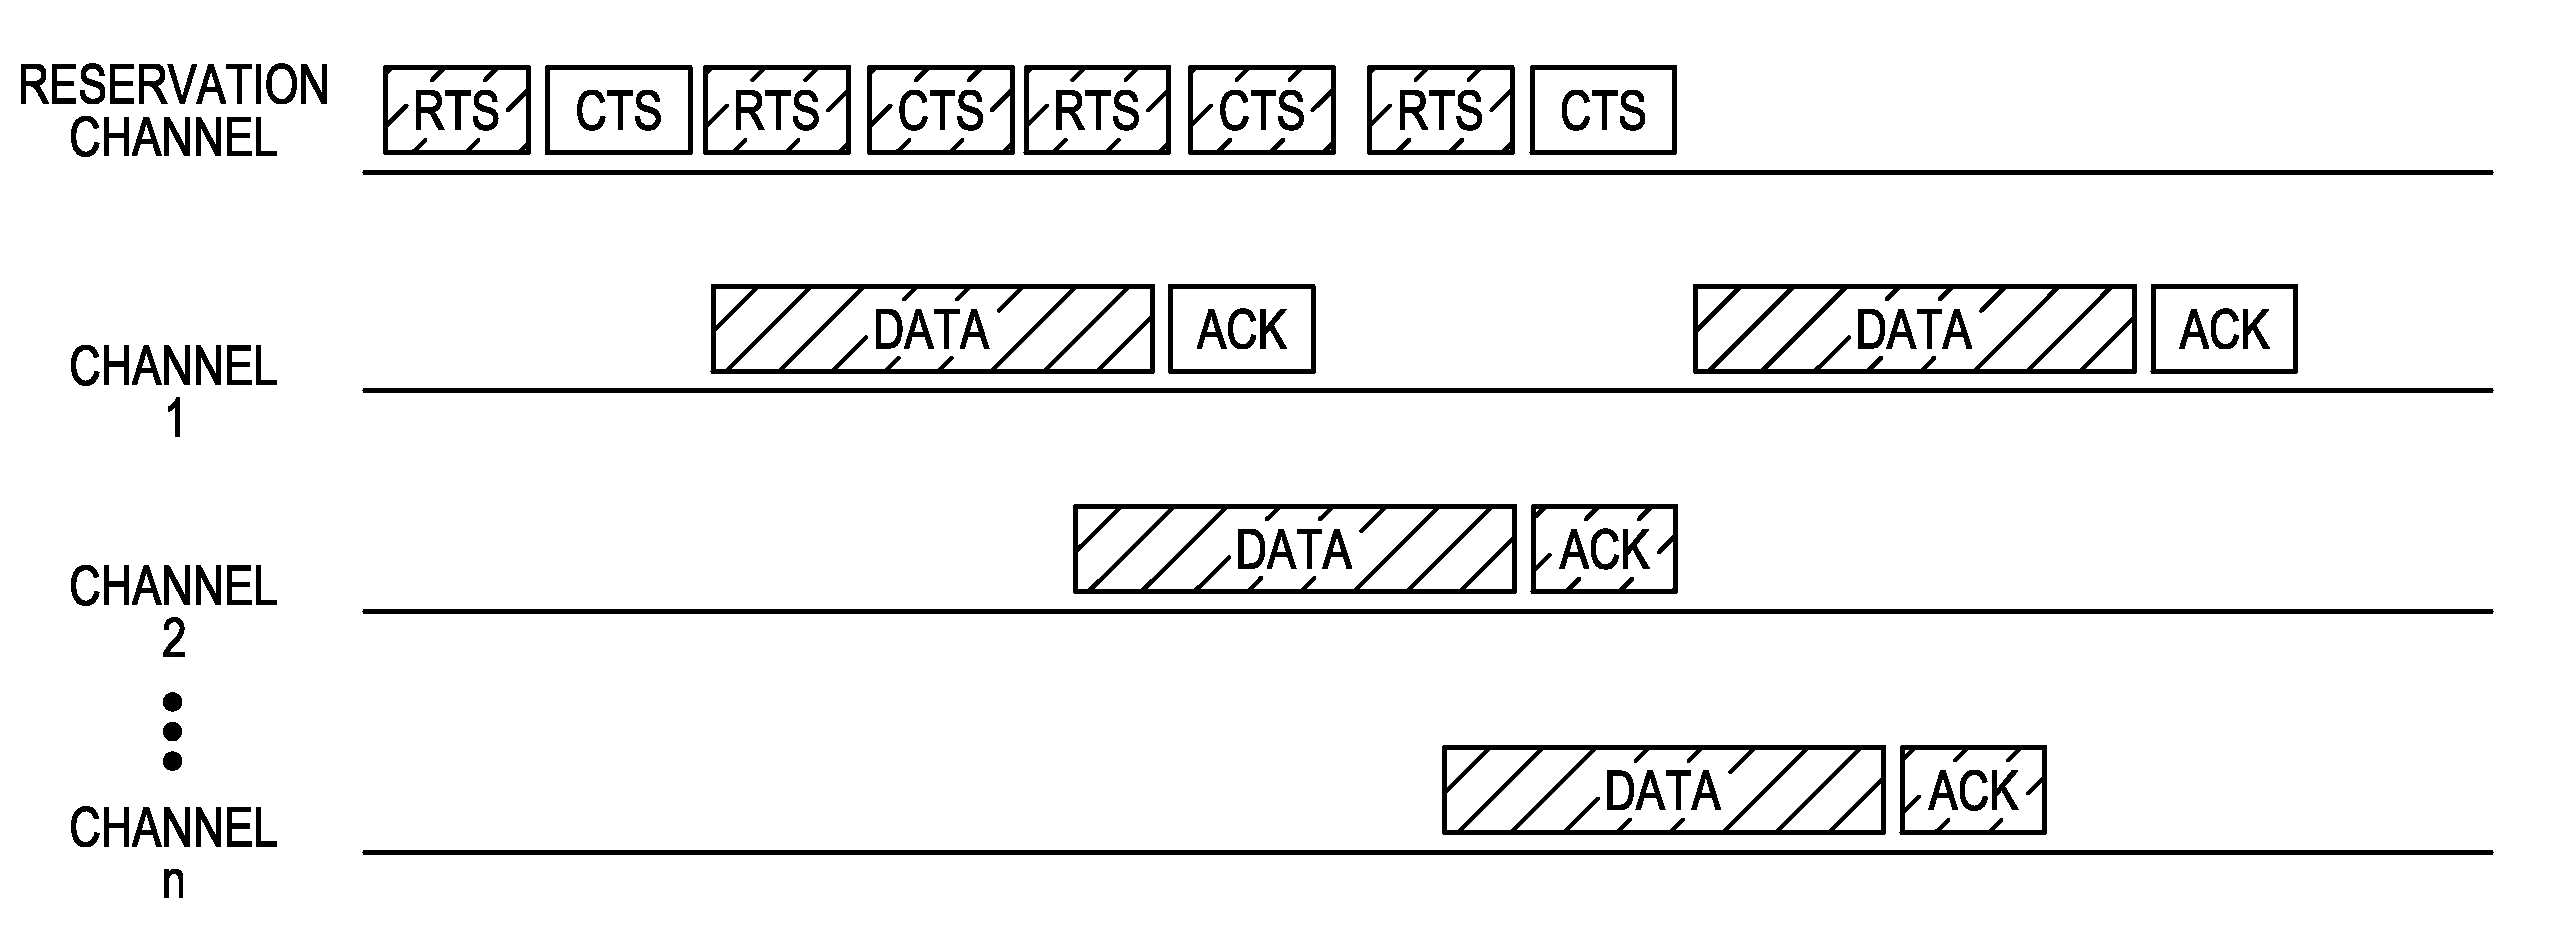 System and method employing algorithms and protocols for optimizing carrier sense multiple access (CSMA) protocols in wireless networks